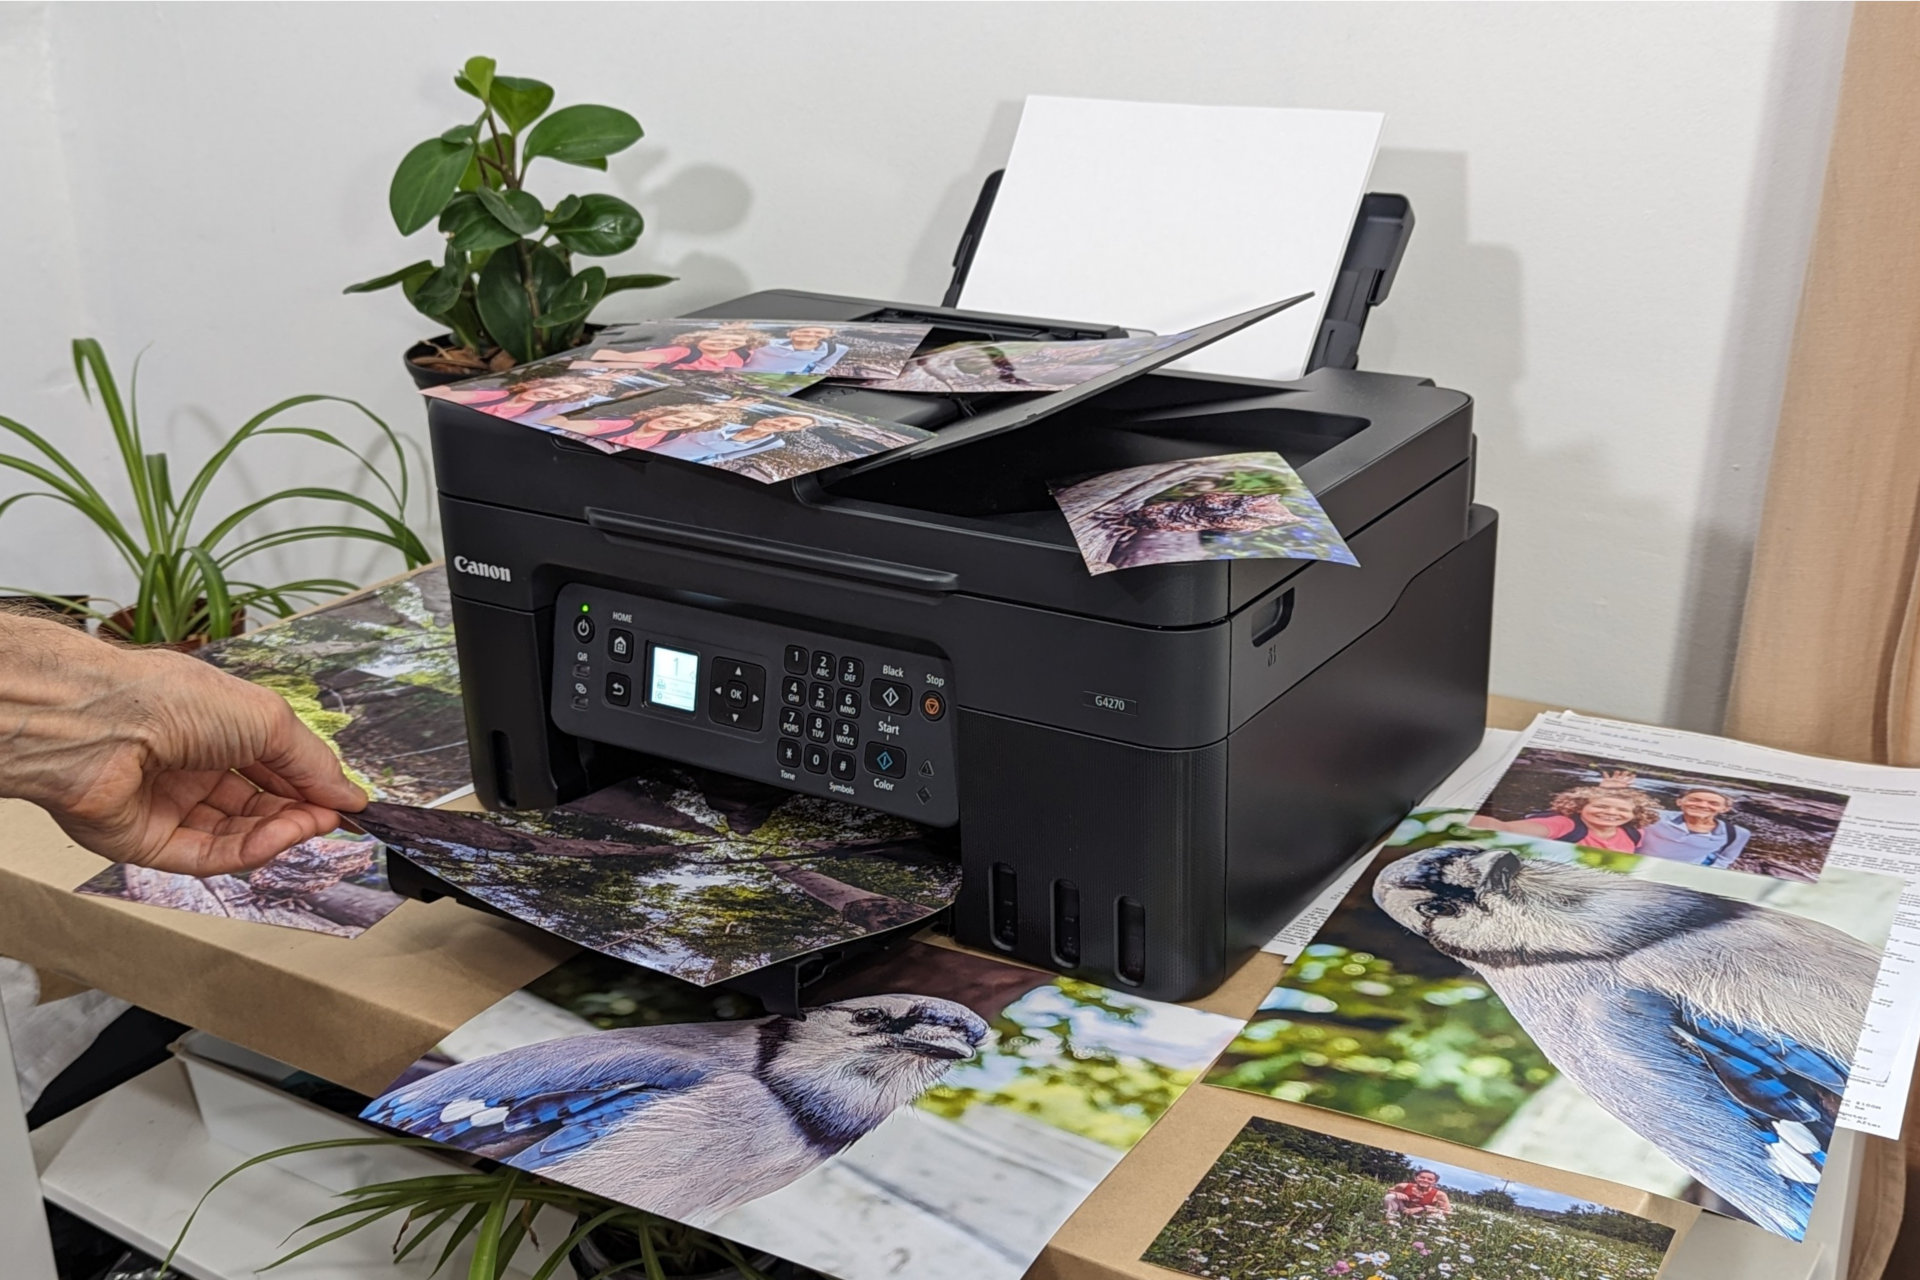 Canon's Pixma G4270 can print a massive number of pages before needing a refill.